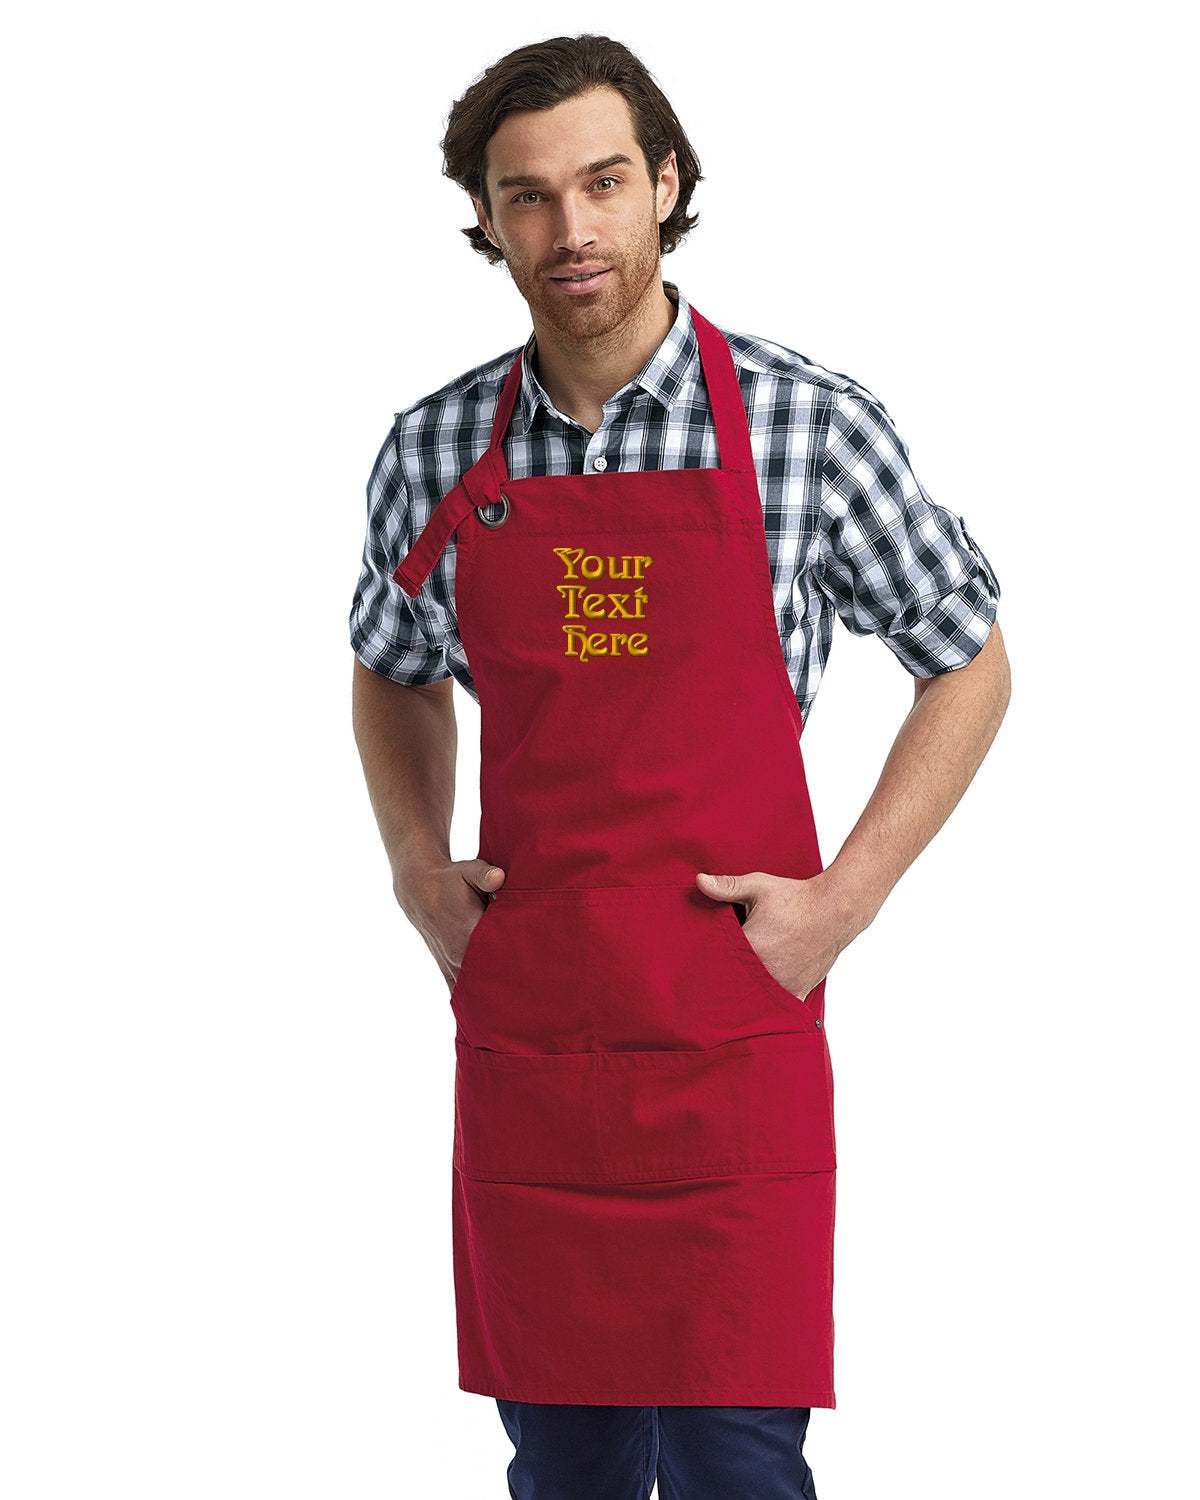 Unisex Pocket Apron Your Personalized Text Embroidered - 3 pack  - red